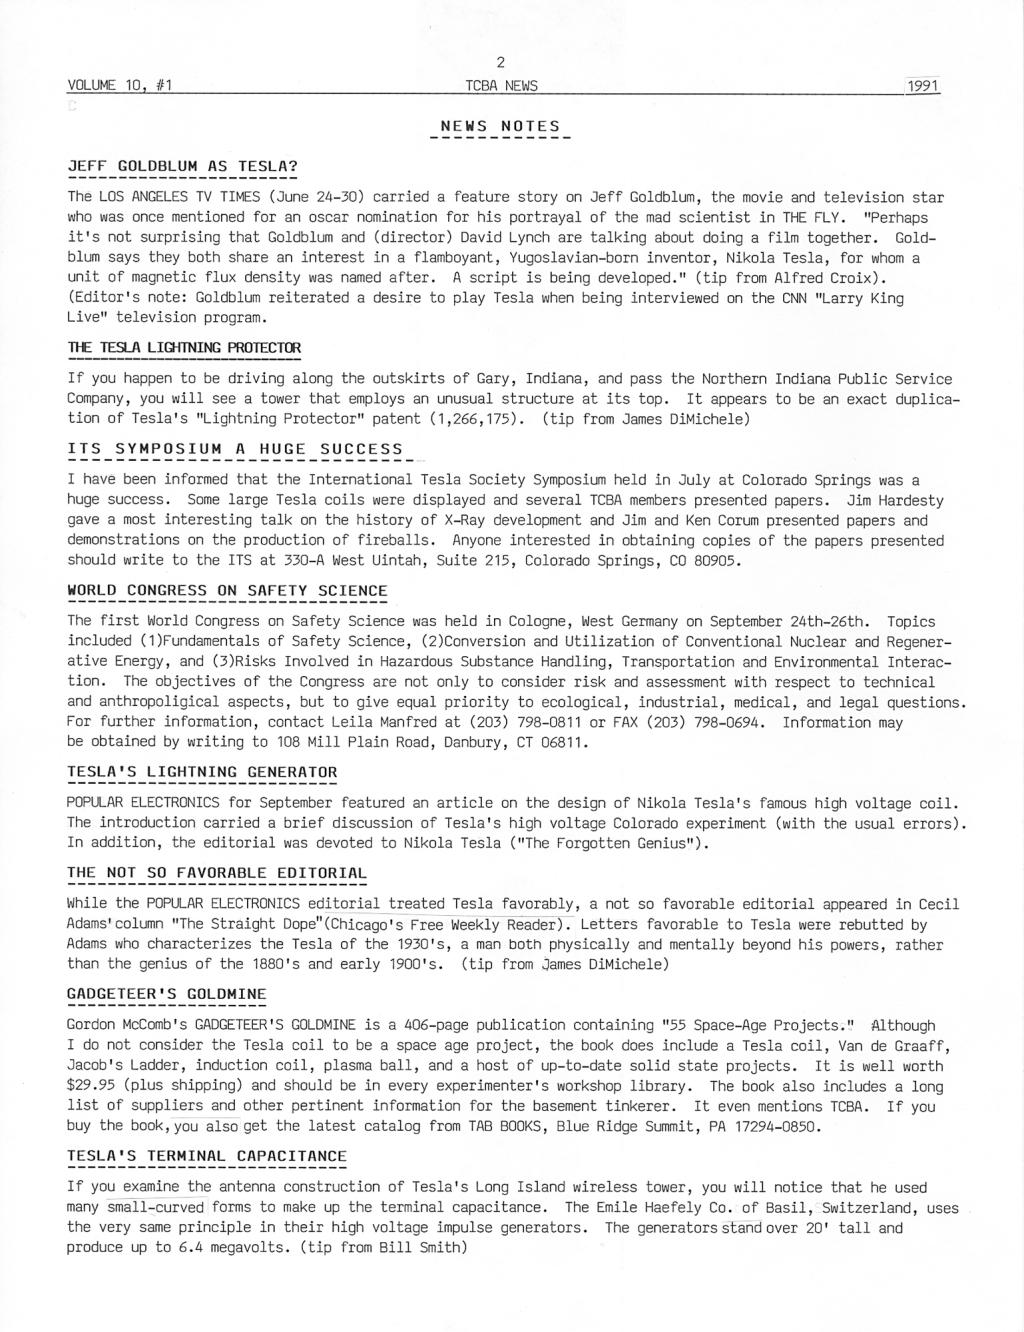 TCBA Volume 10 - Issue 1 - Page 2 of 18